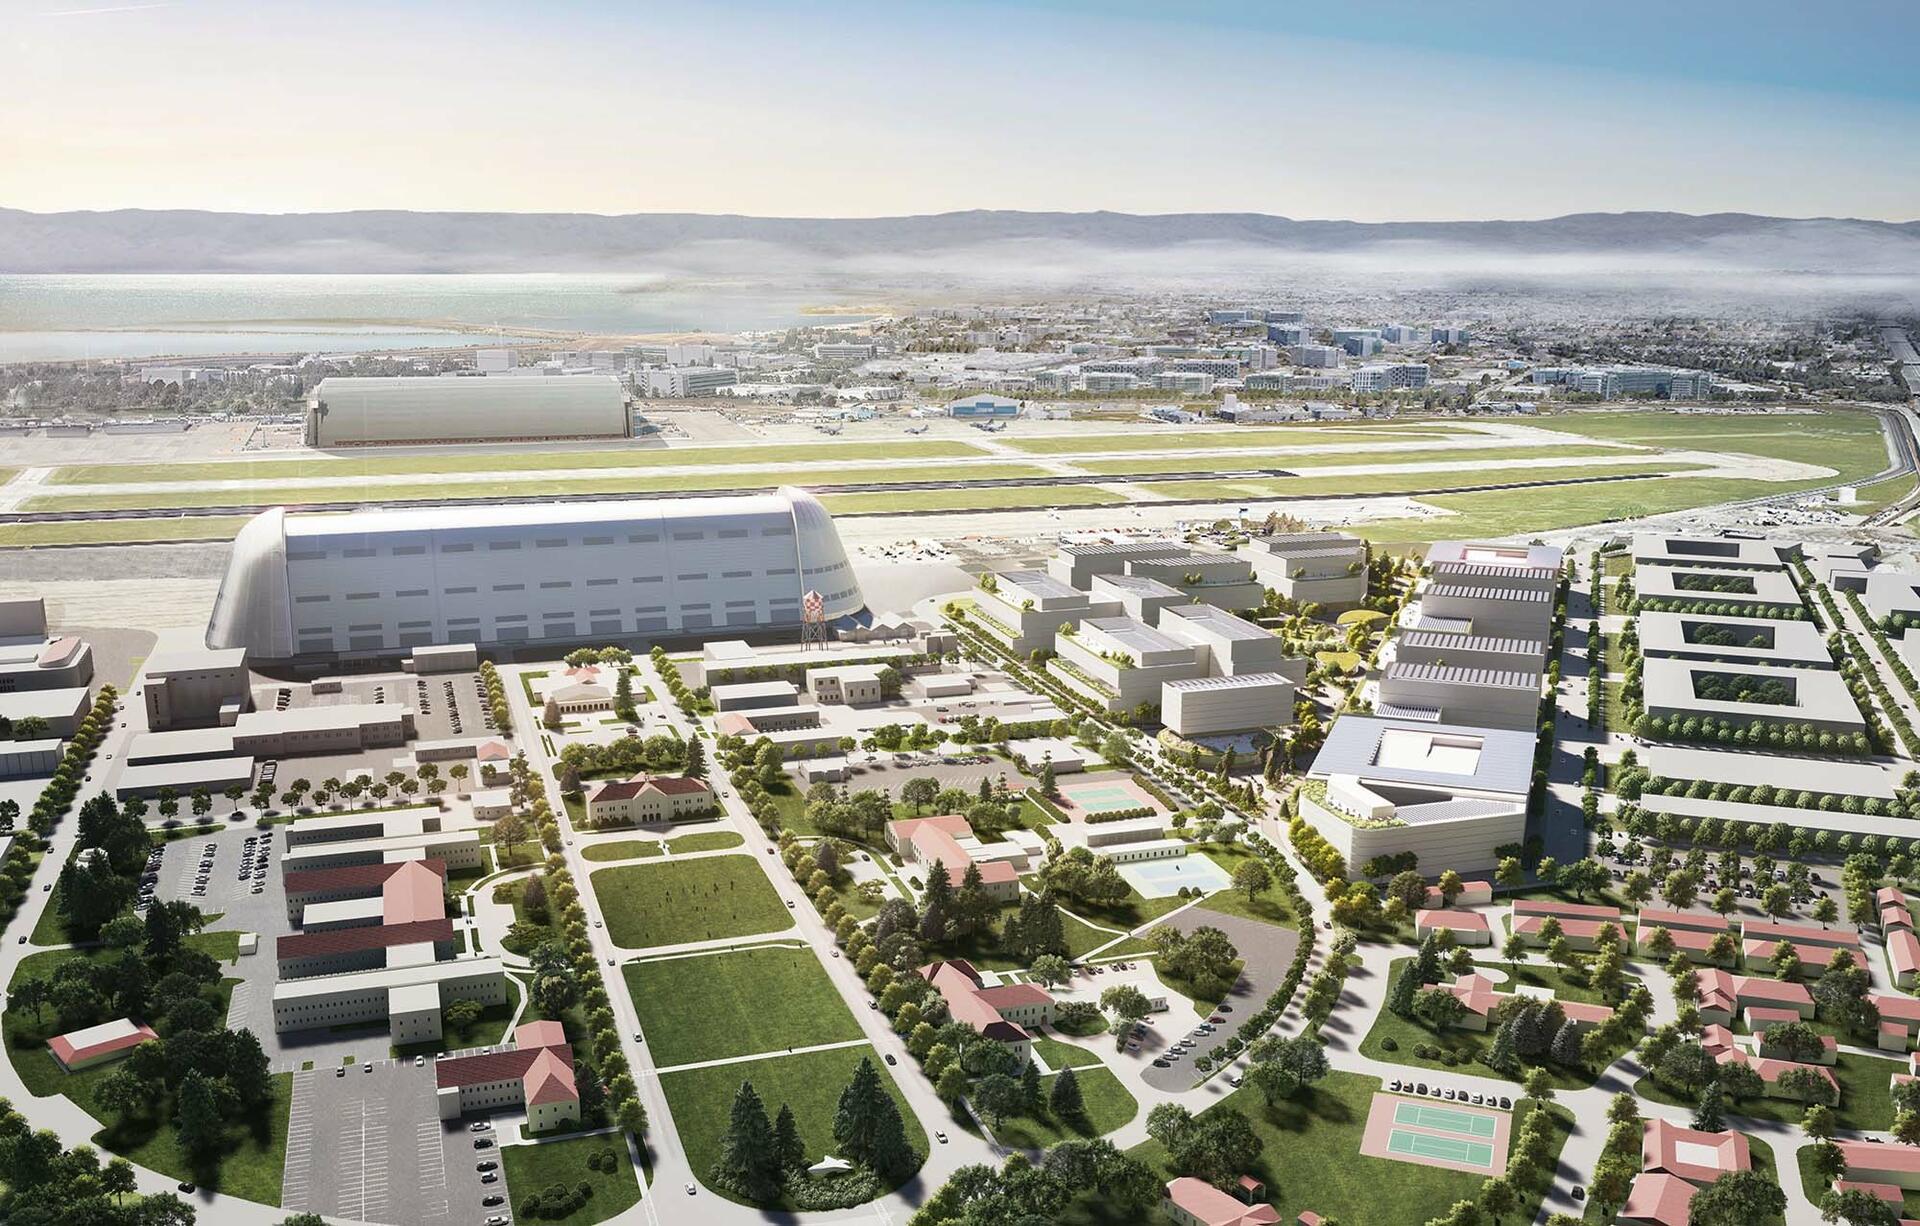 Artist's rendering of NASA's Ames Research Center and Moffett Field showing the future location of the Berkeley Space Center (gray buildings stretching from center to right). 